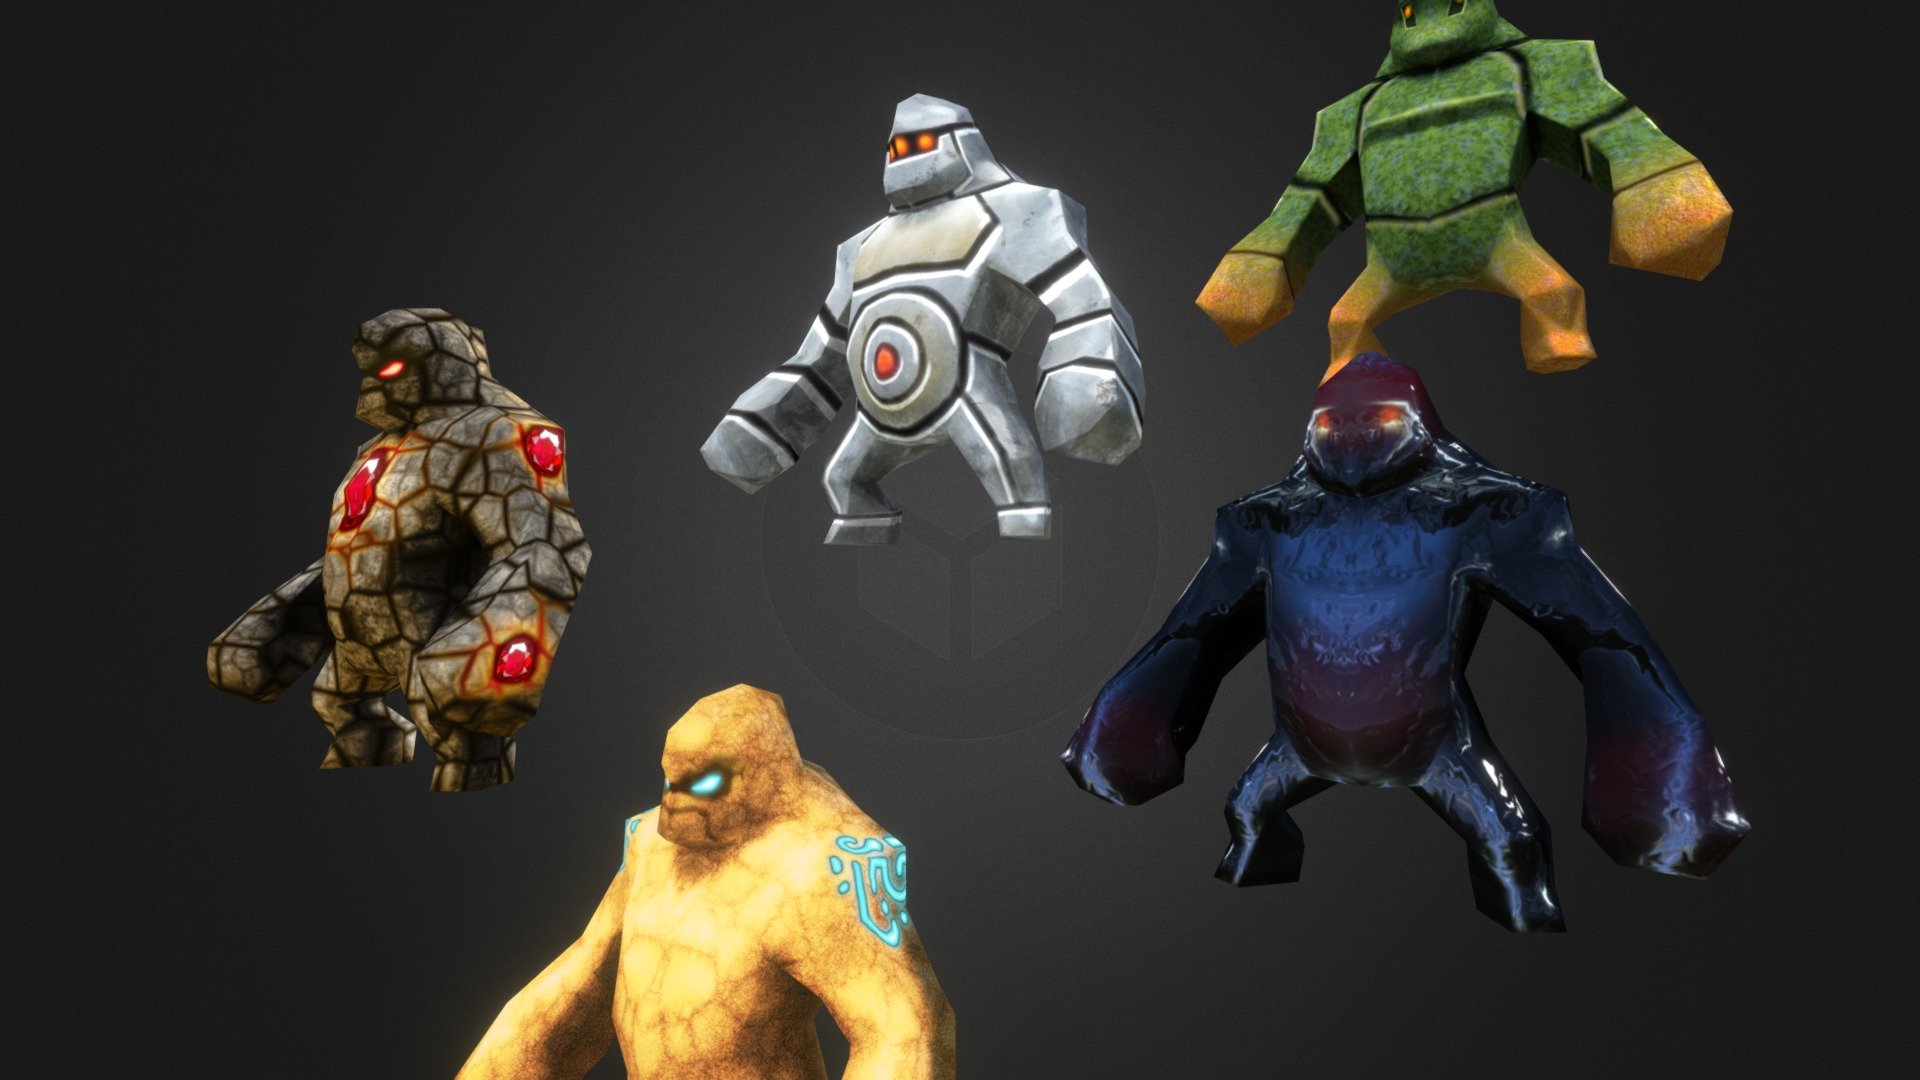 Stone, Sand, Iron, Obsidian, and Jade
For the mobile game Pocket Legends
© Spacetime Studios - Golems - 3D model by Jiovanie Velazquez (@Jiovanie) 3d model